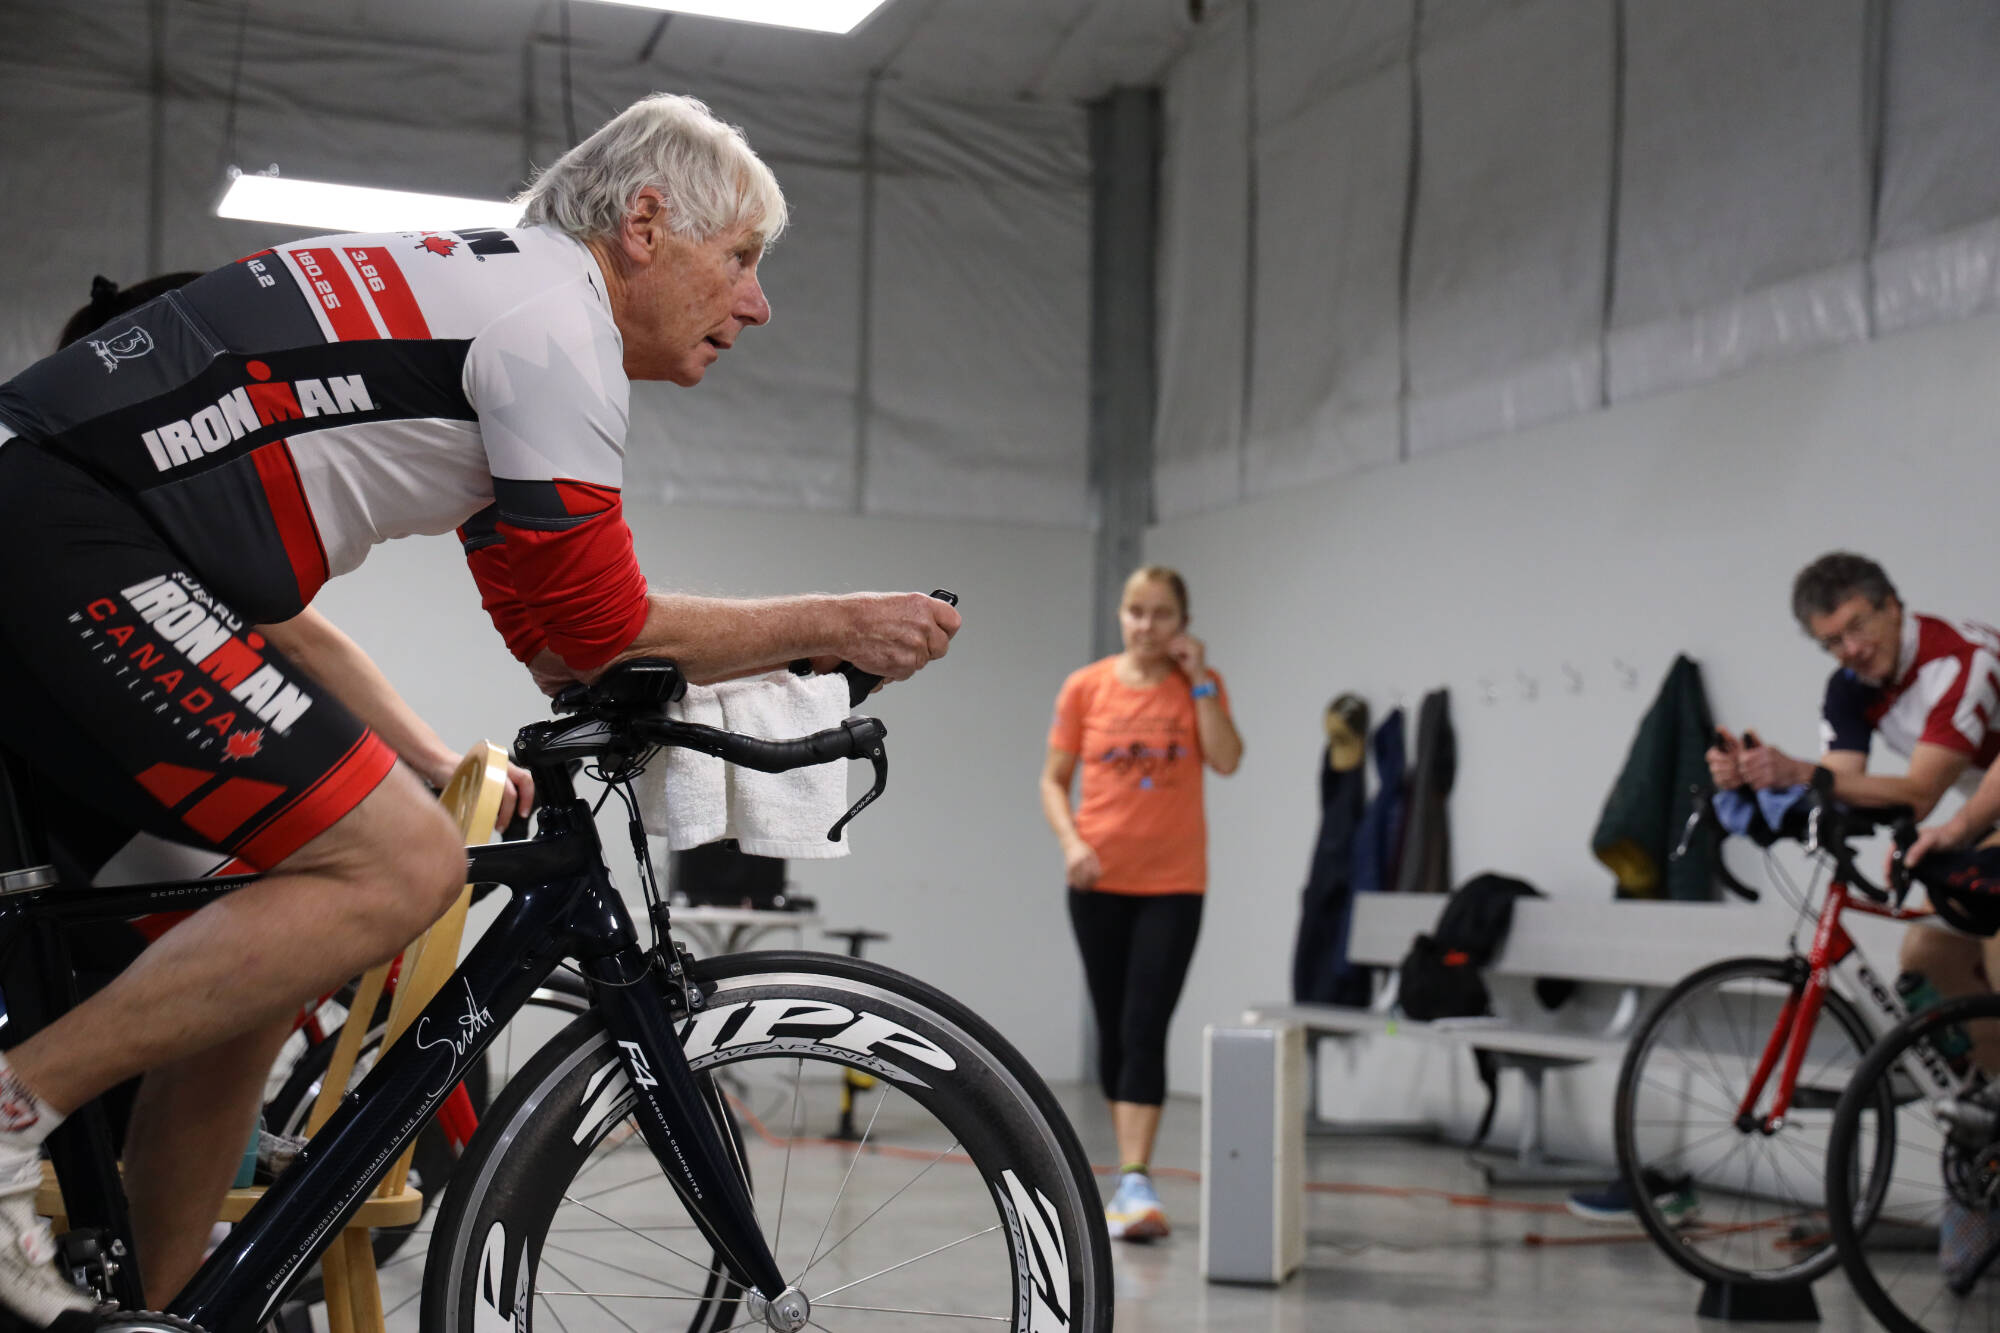 Reed Stoops pedals a stationary bike with other athletes during a High Cadence Triathlon Team workout at the Dimond Park Field House Thursday evening. Many athletes are still deciding what to do after it was announced in mid-December the Ironman Group announced its decision to cancel the Ironman Alaska races for 2023 and 2024.